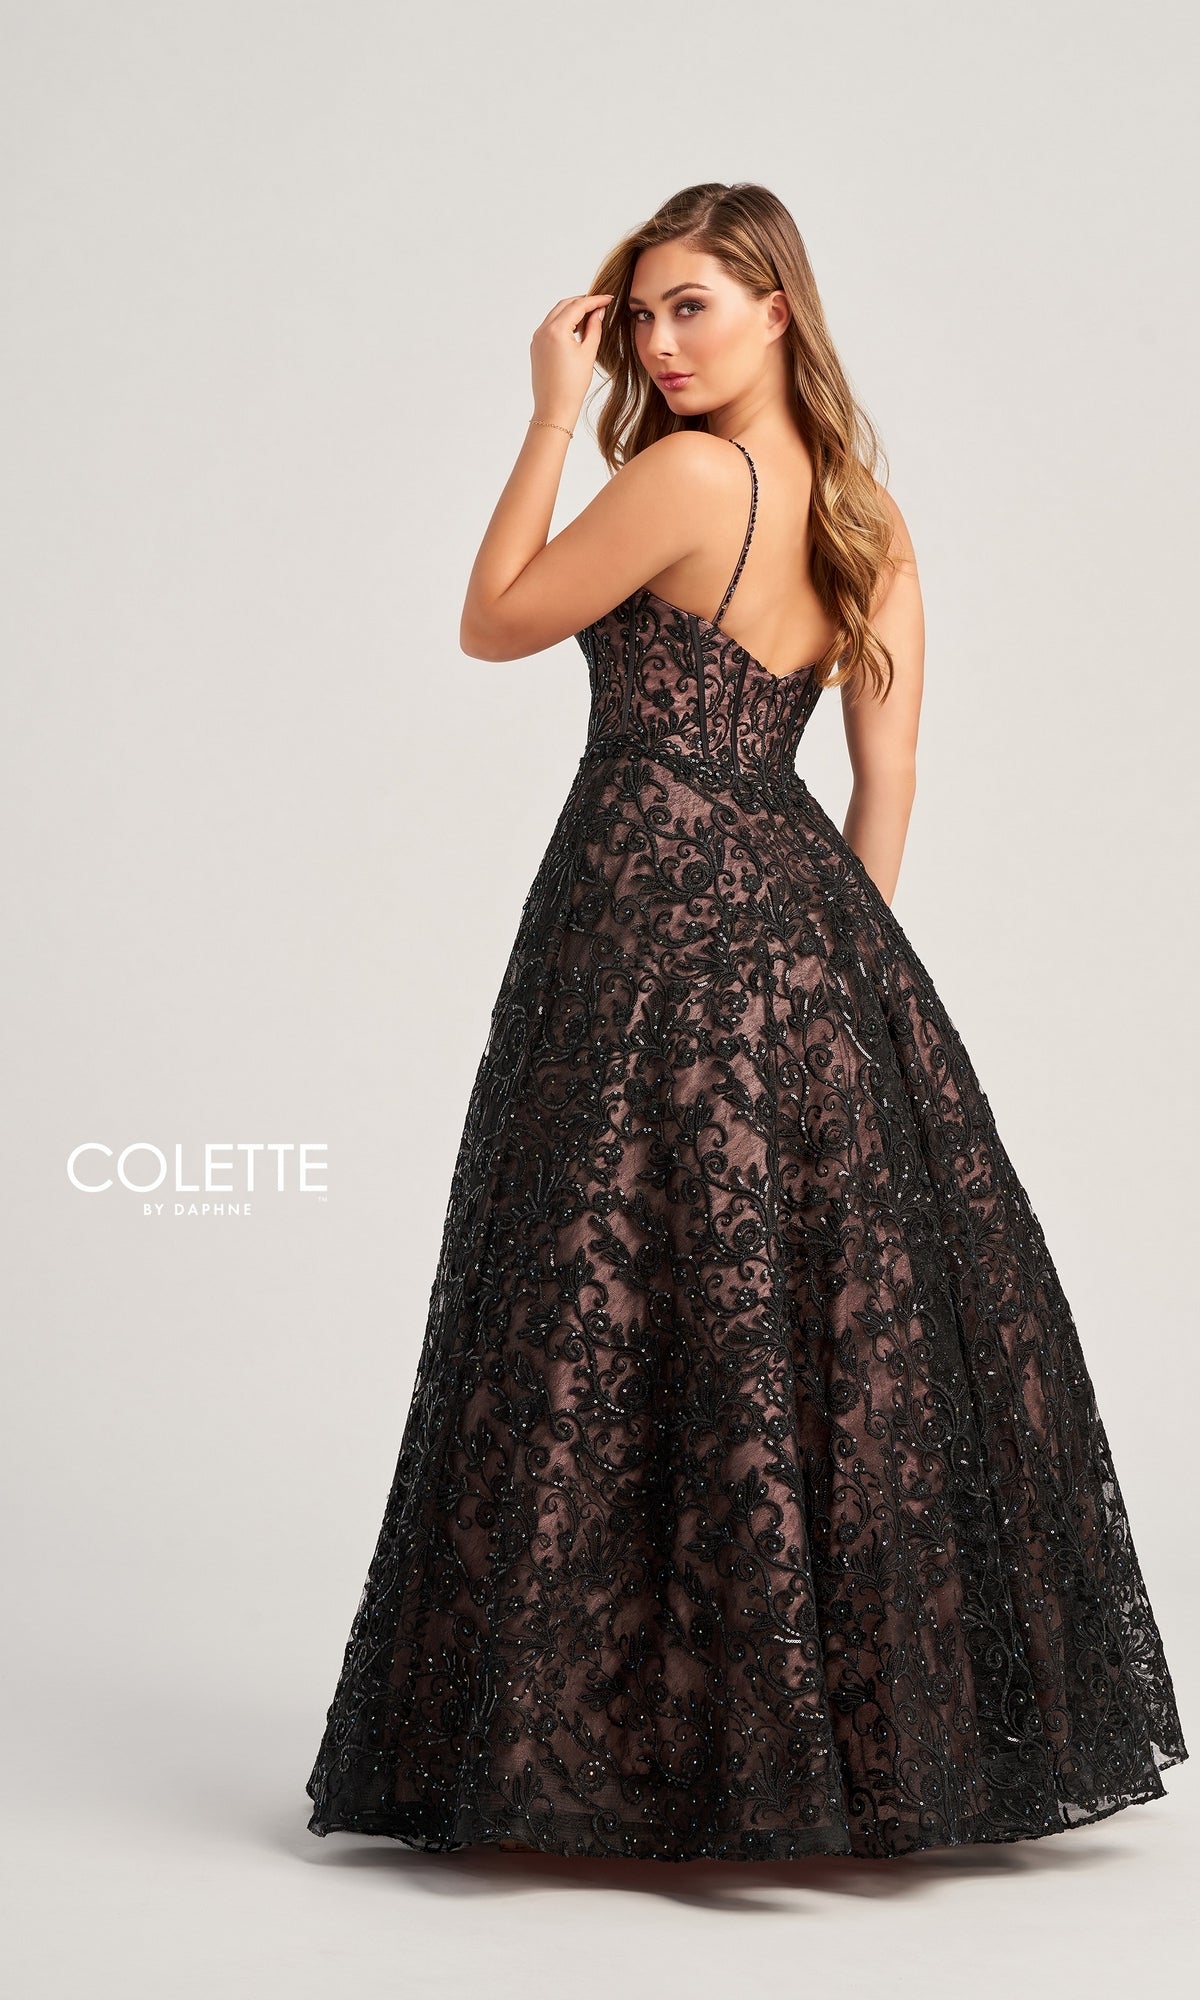 Colette Beaded-Lace Long Black Ball Gown CL5131